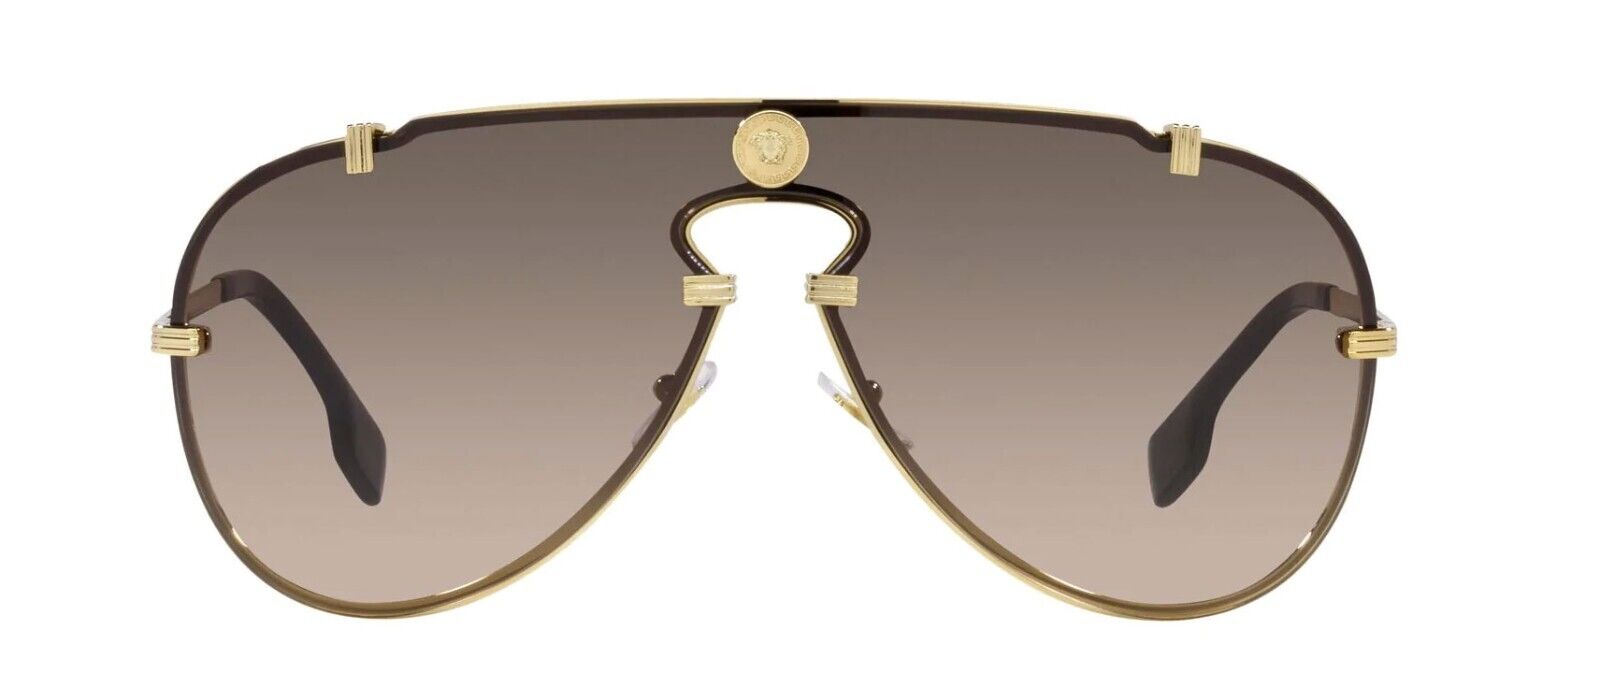 Versace Sunglasses VE 2243 1002/13 43-xx-140 Gold / Brown Gradient Made in Italy-8056597661553-classypw.com-1